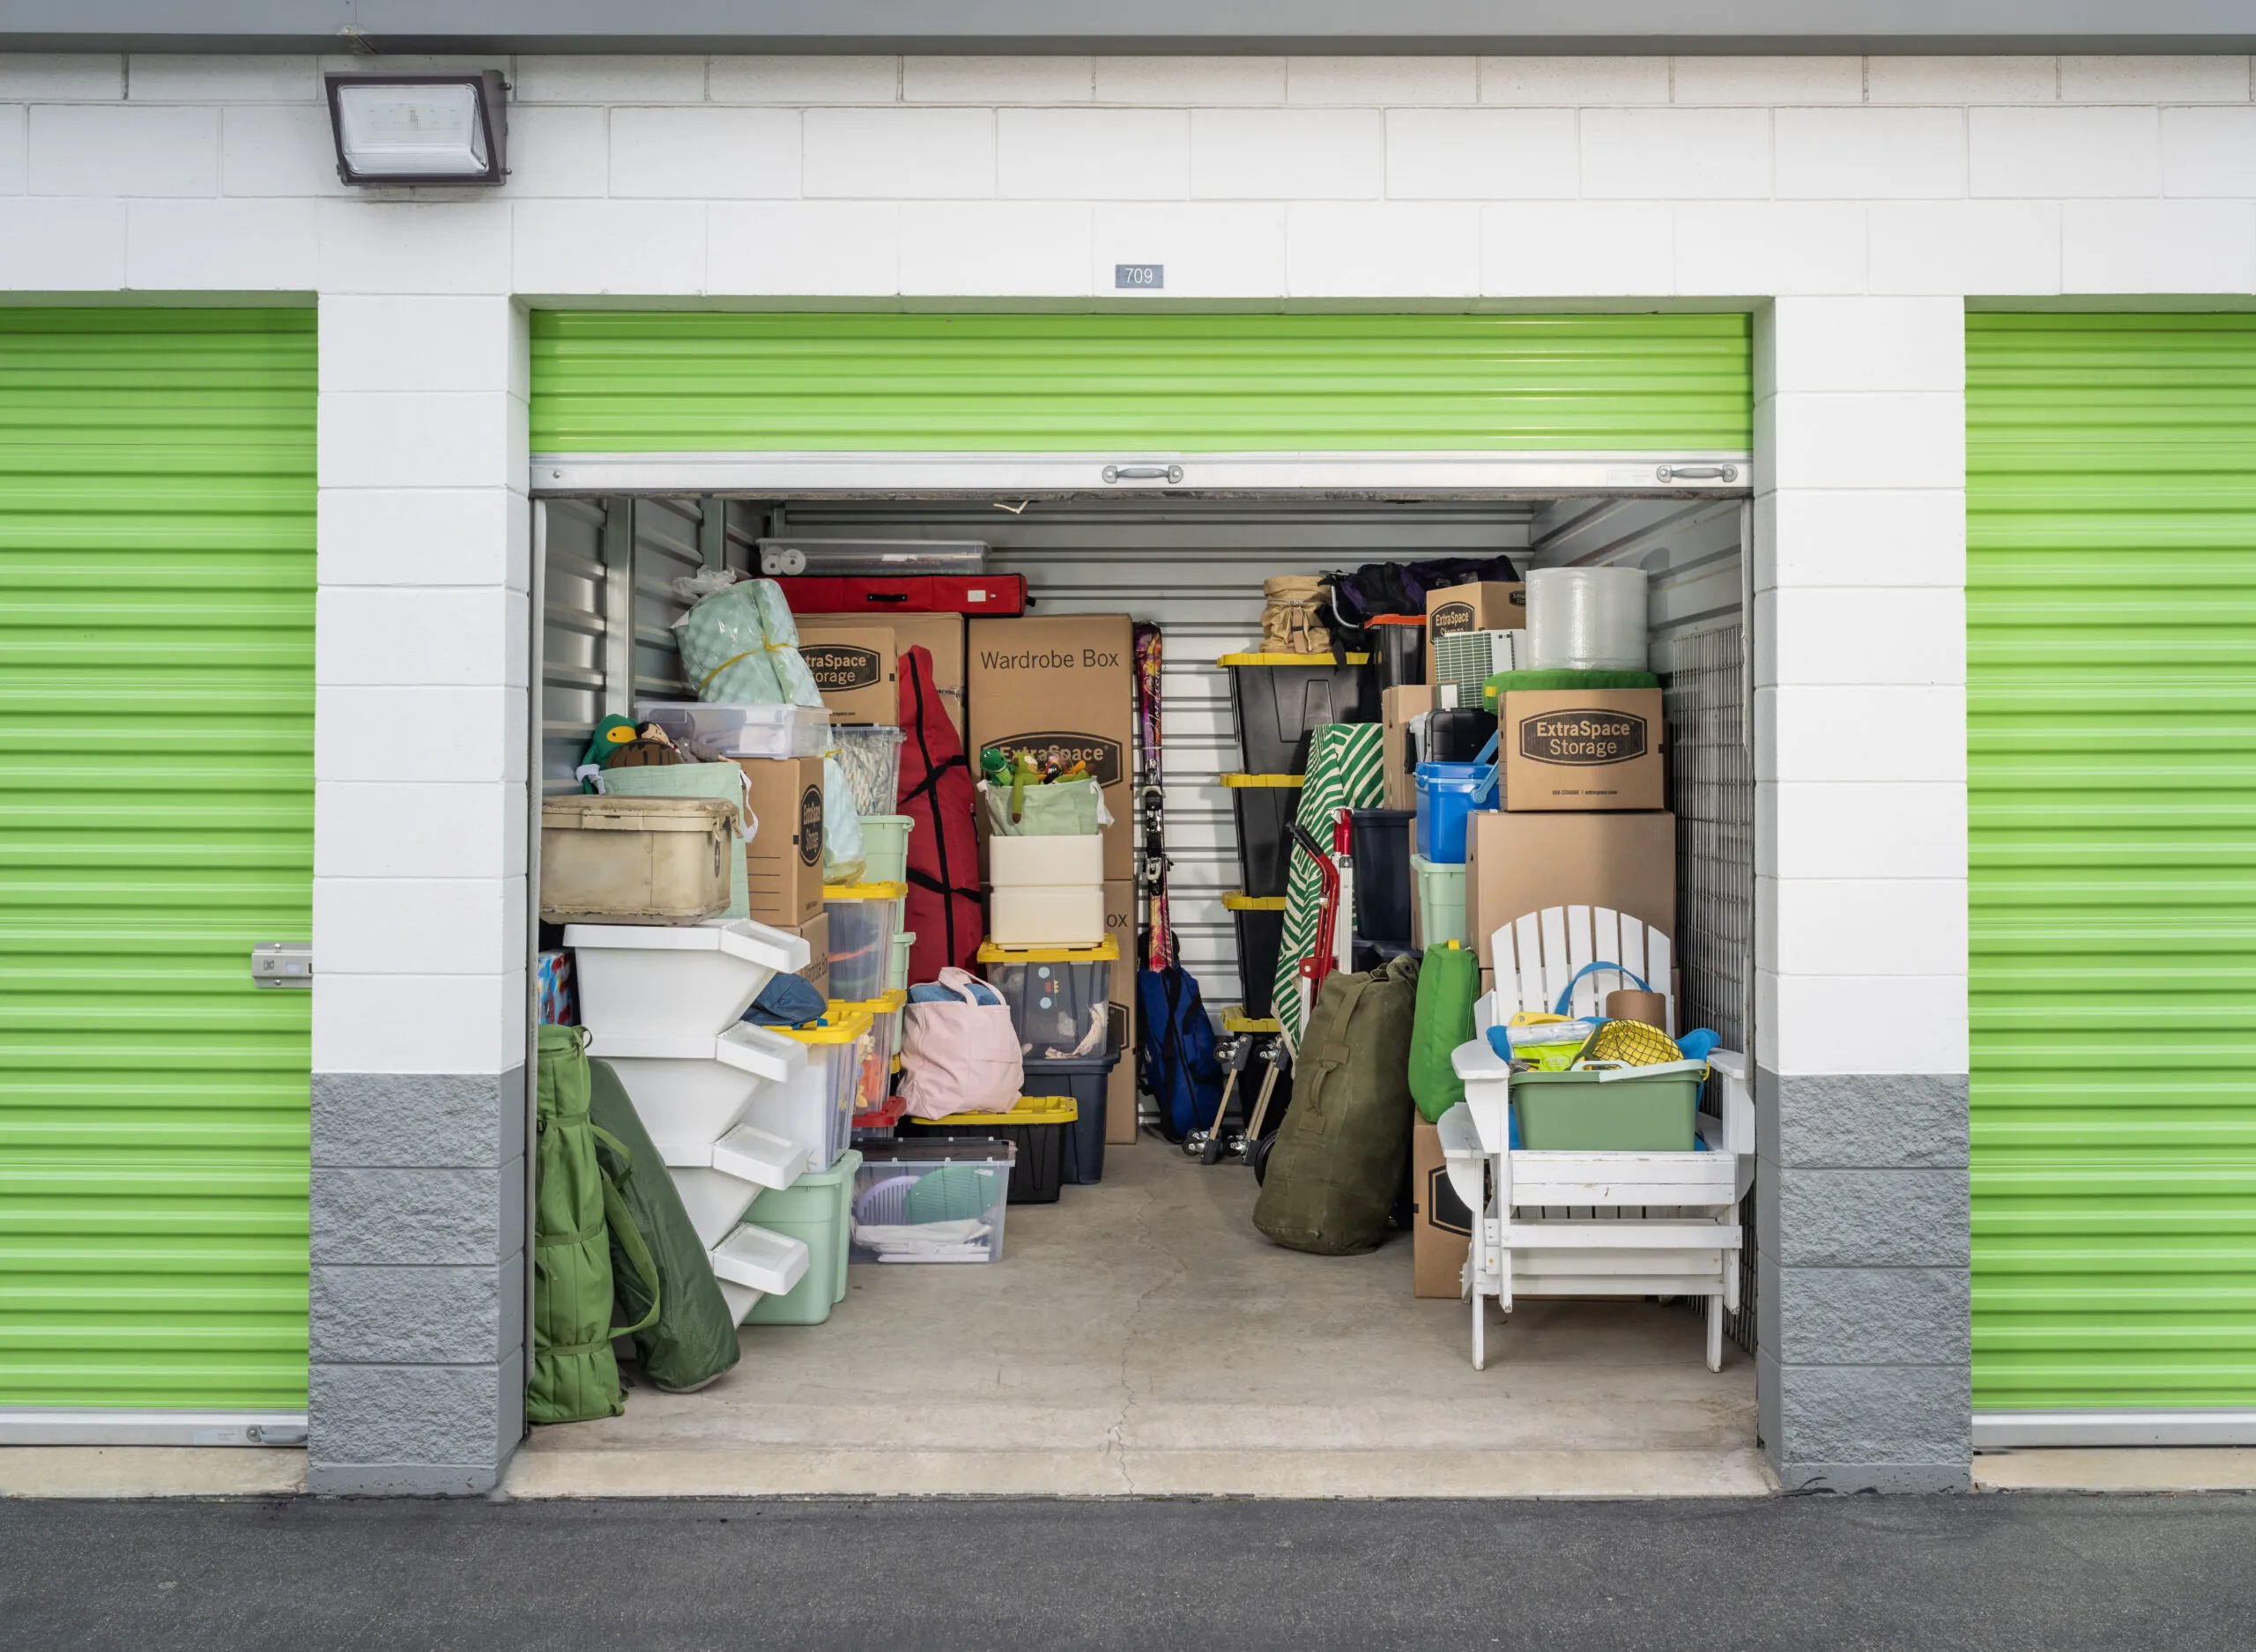 Extra Space Storage unit with green garage door open and filled with storage bins, cardboard boxes, and furniture